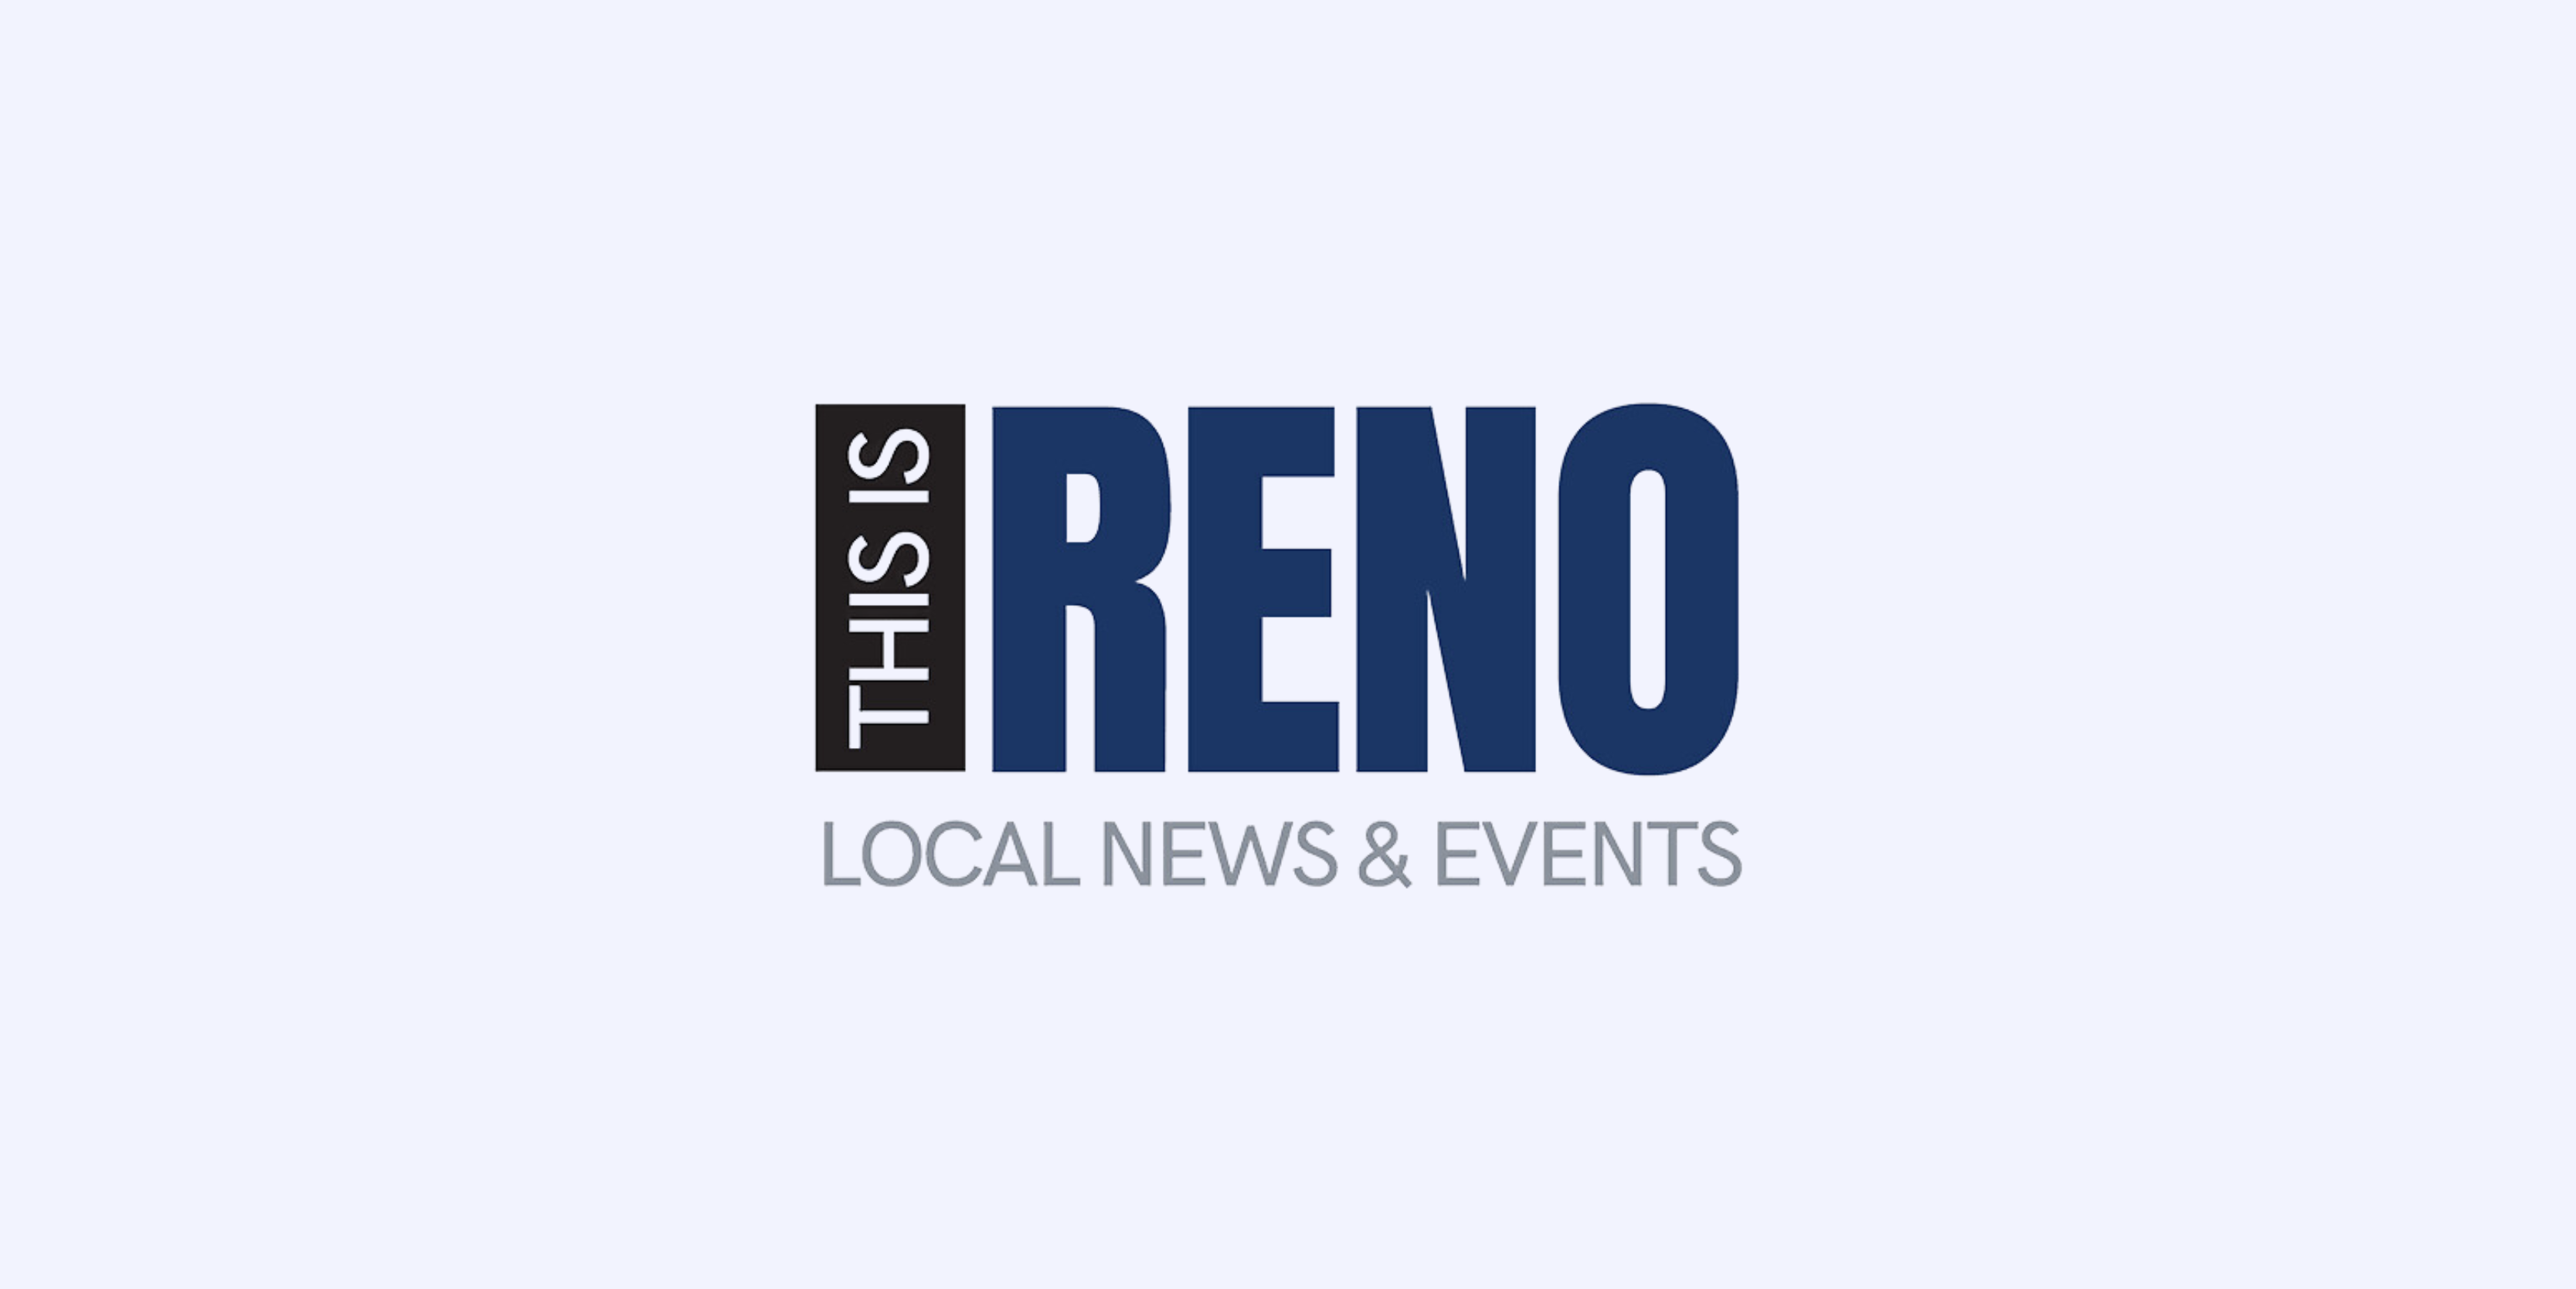 This Is Reno Local News & Events